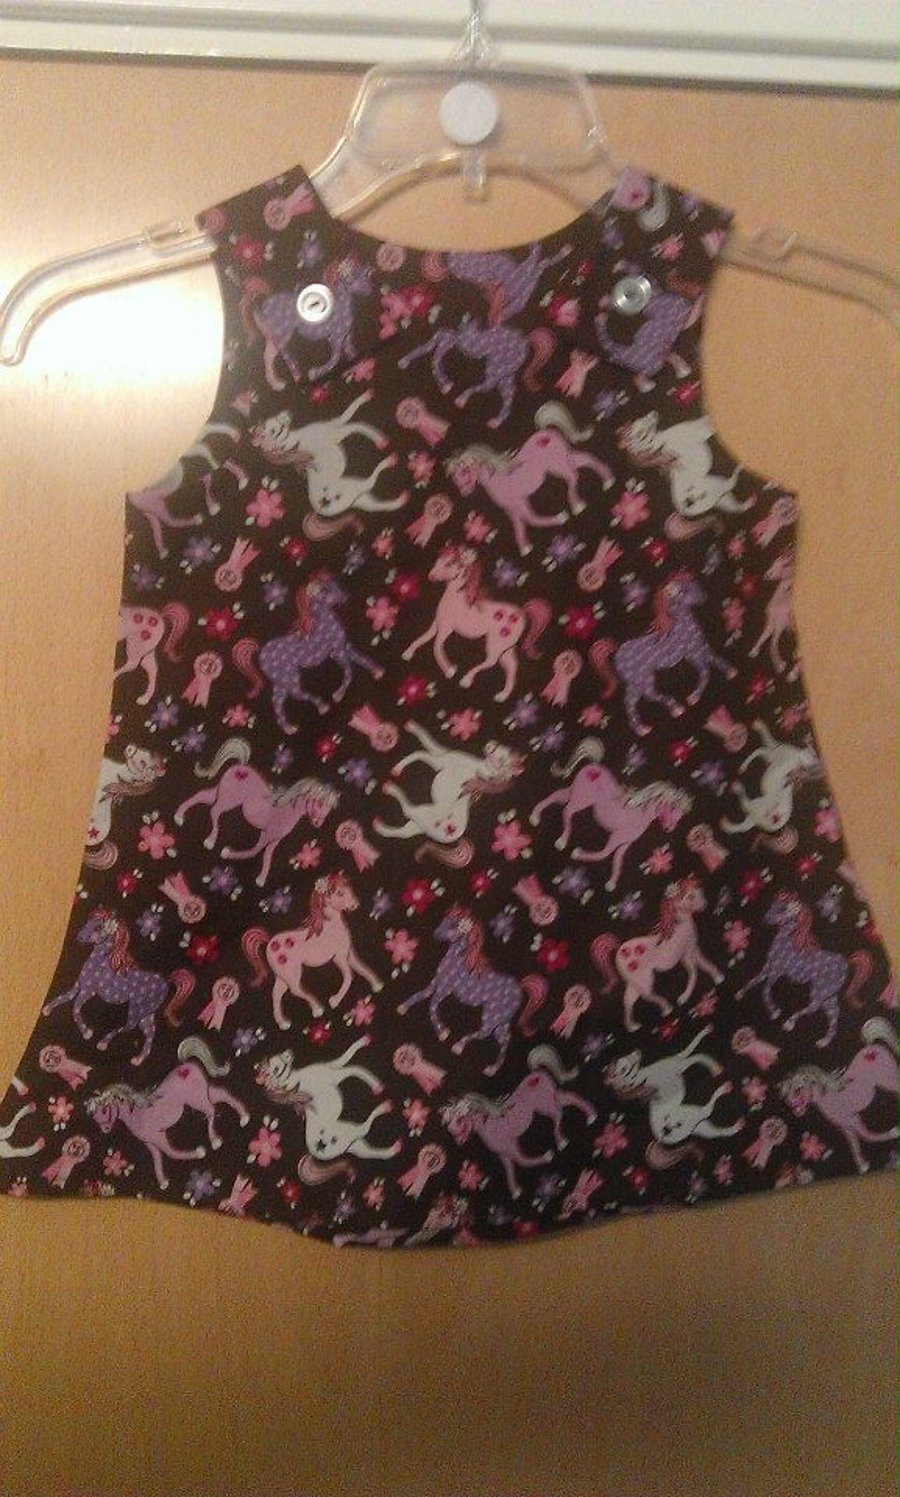 A-line horse dress for a 2 year old